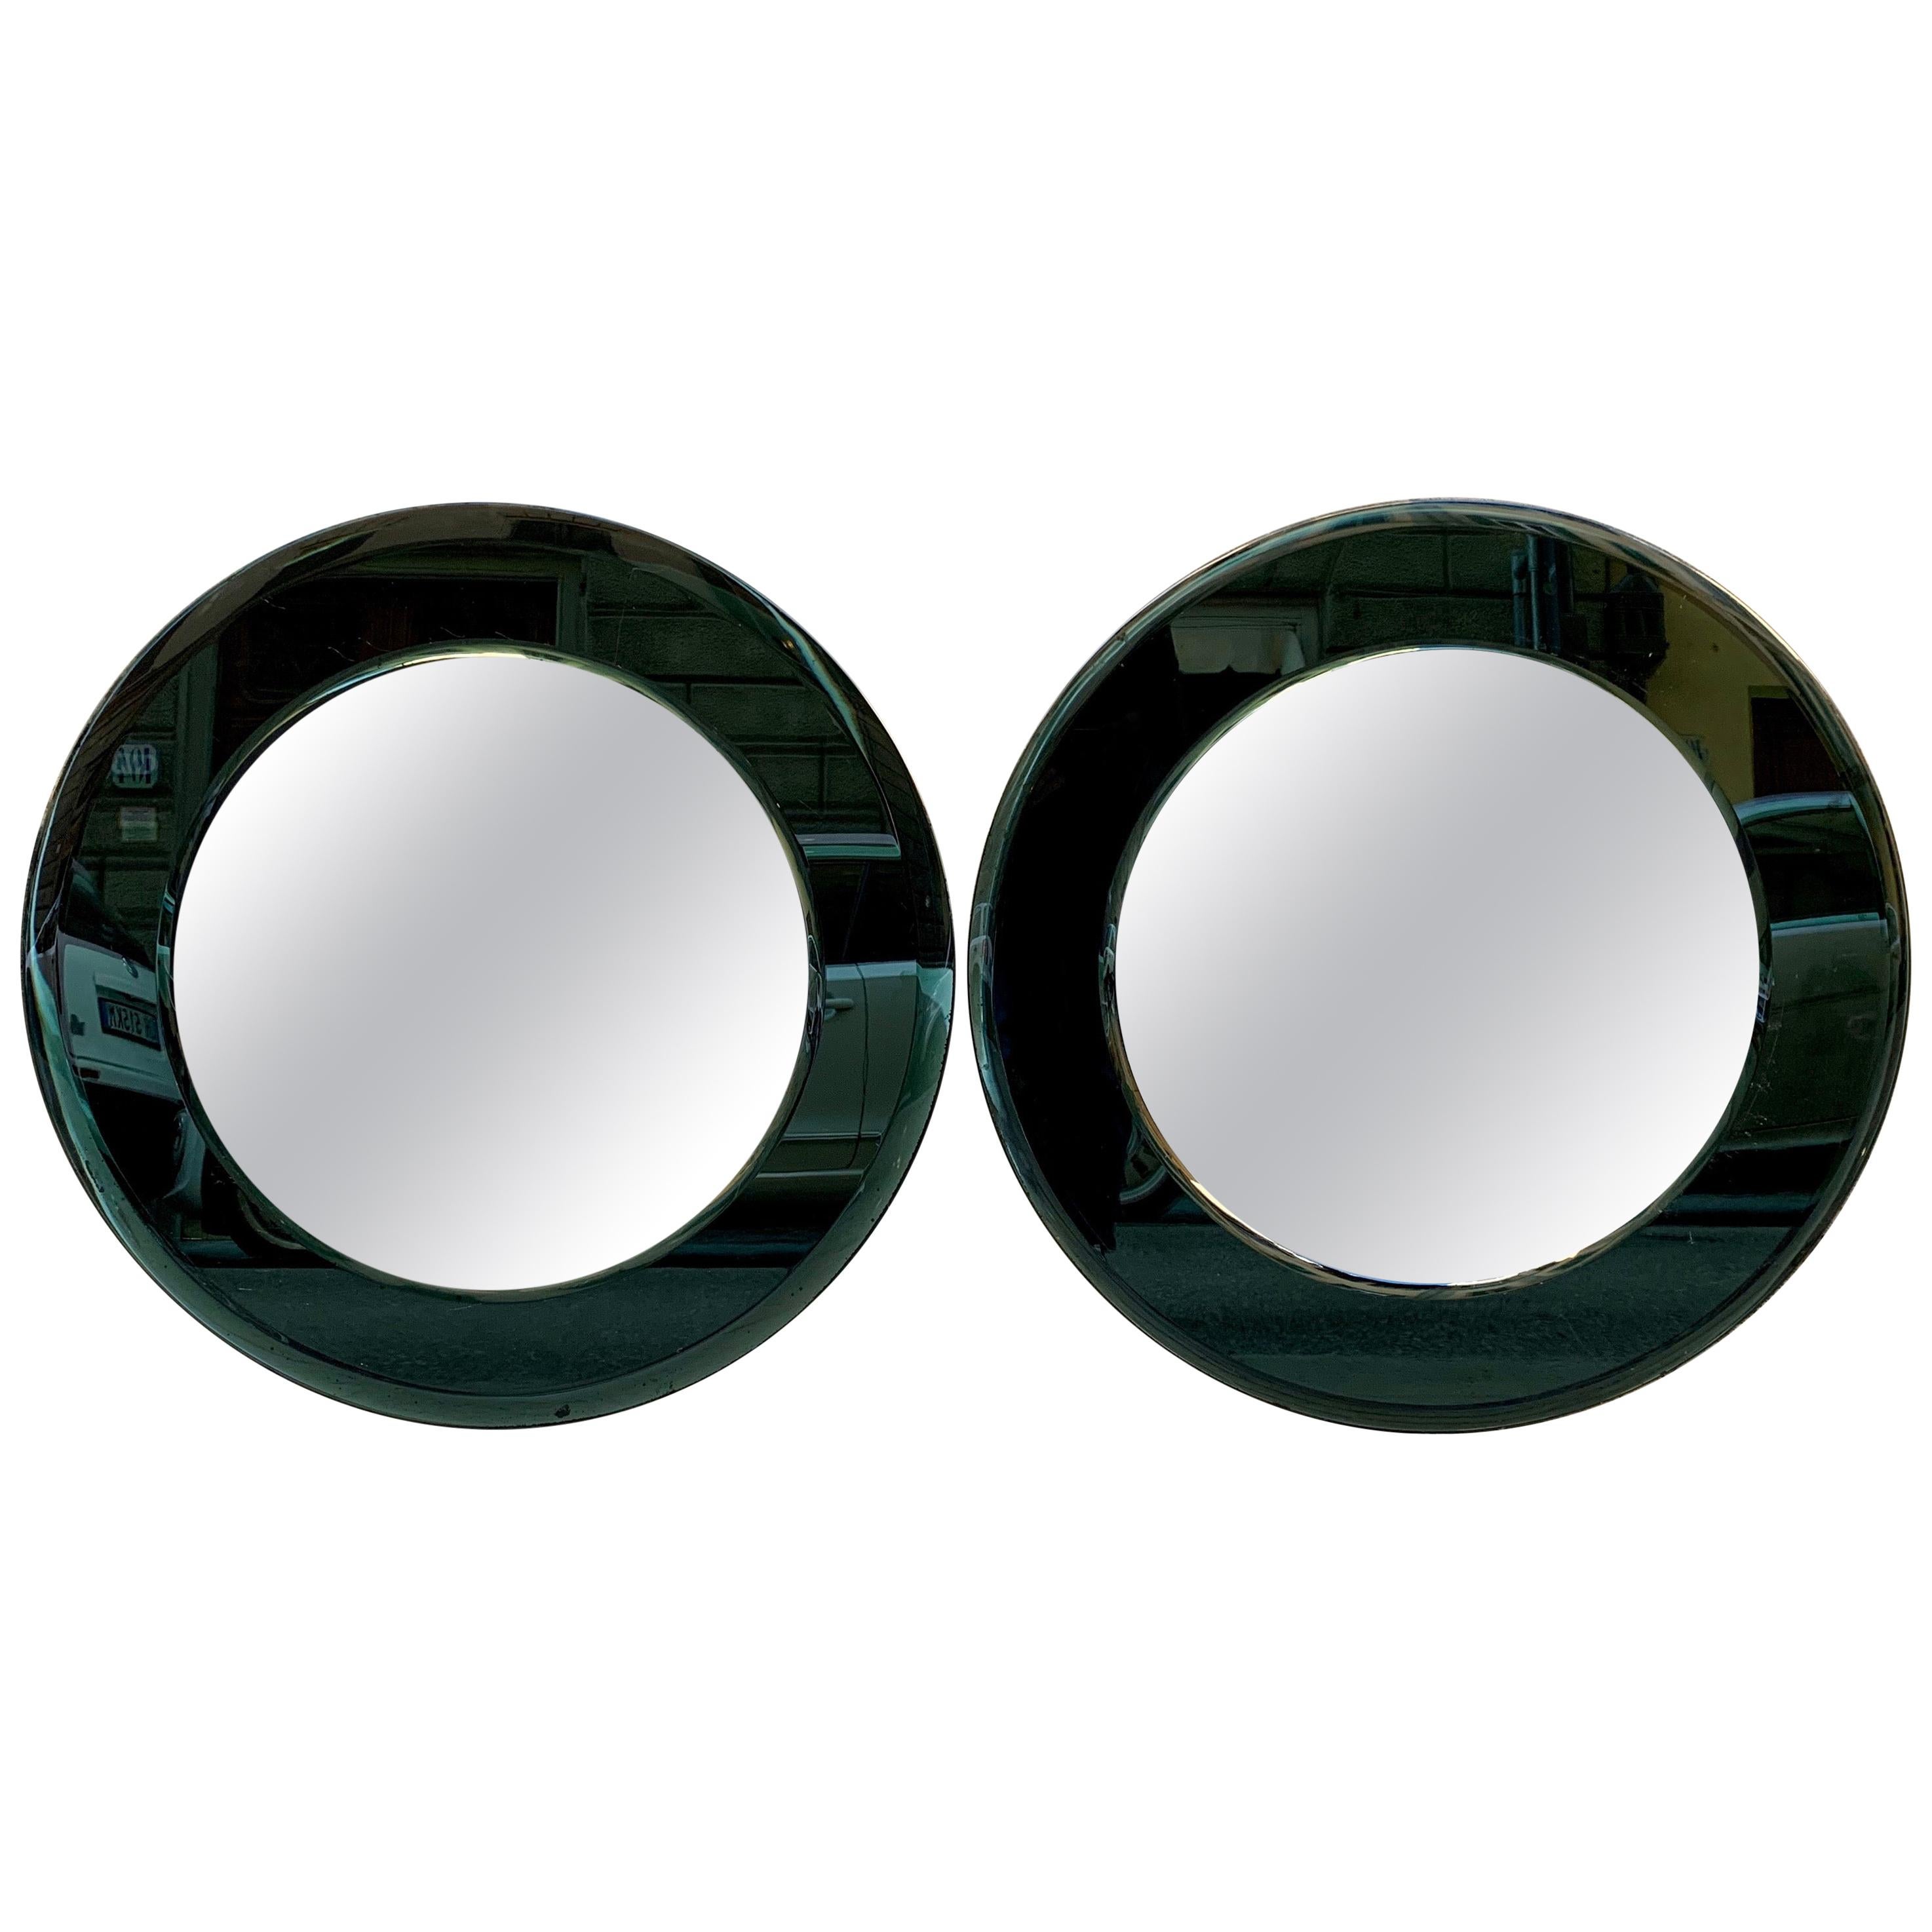 Pair of Italian Vintage Mirrors with Green Glass Frame, 1970s